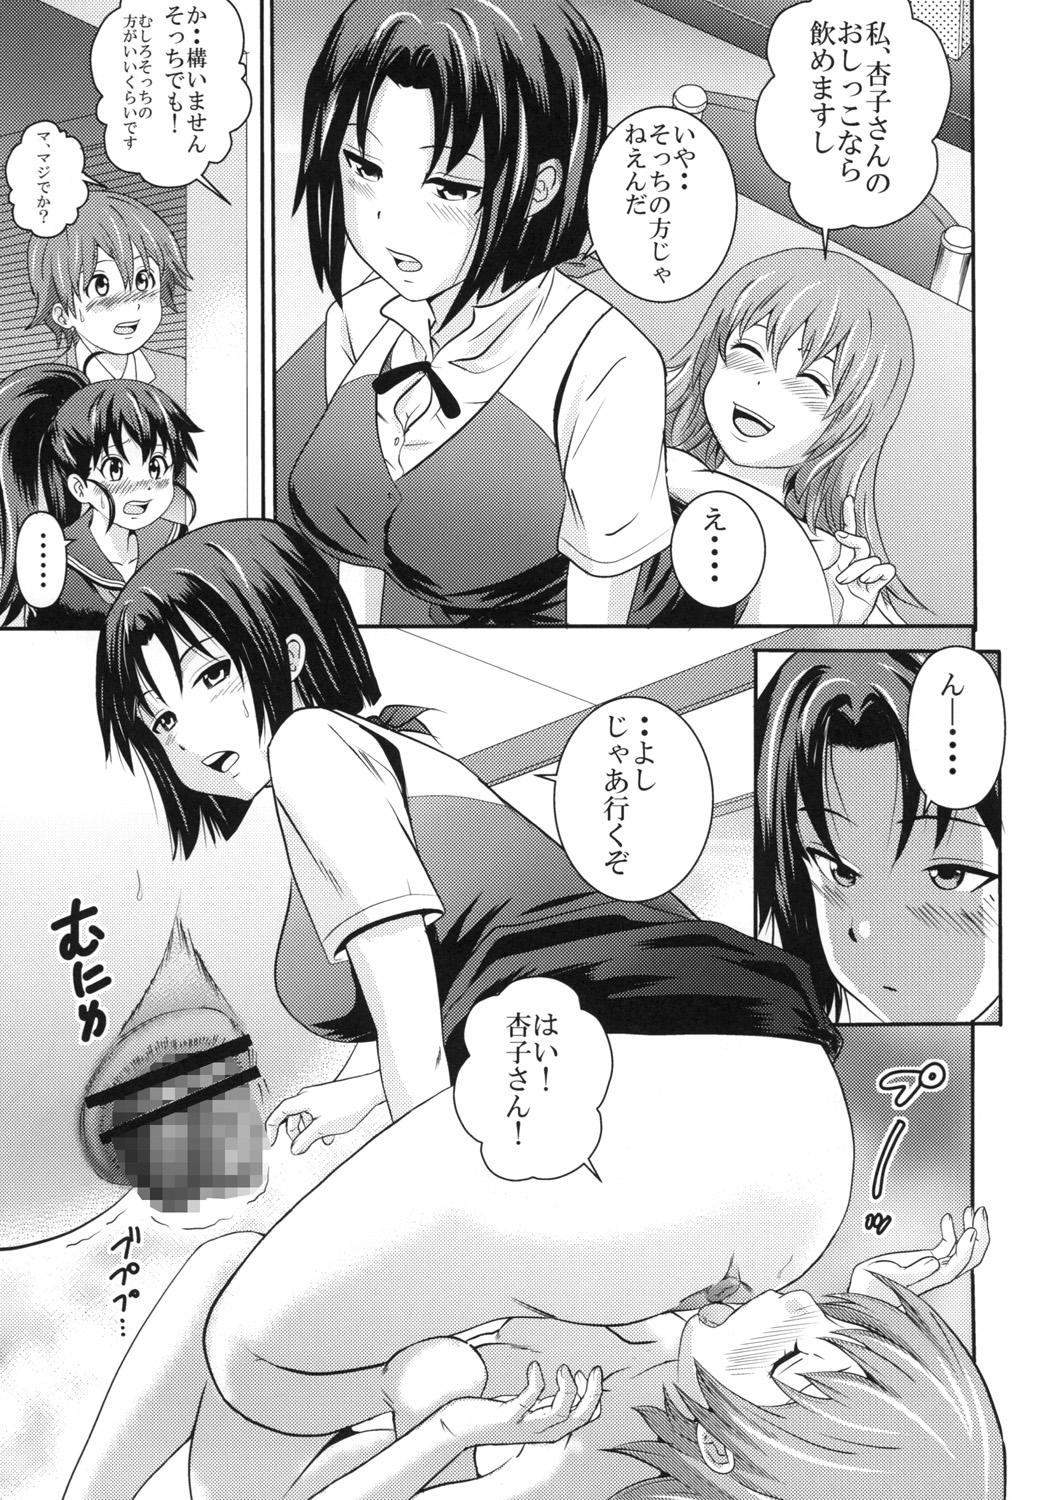 Bbc 杏子と八千代 UNCHING2 - Working Juggs - Page 12